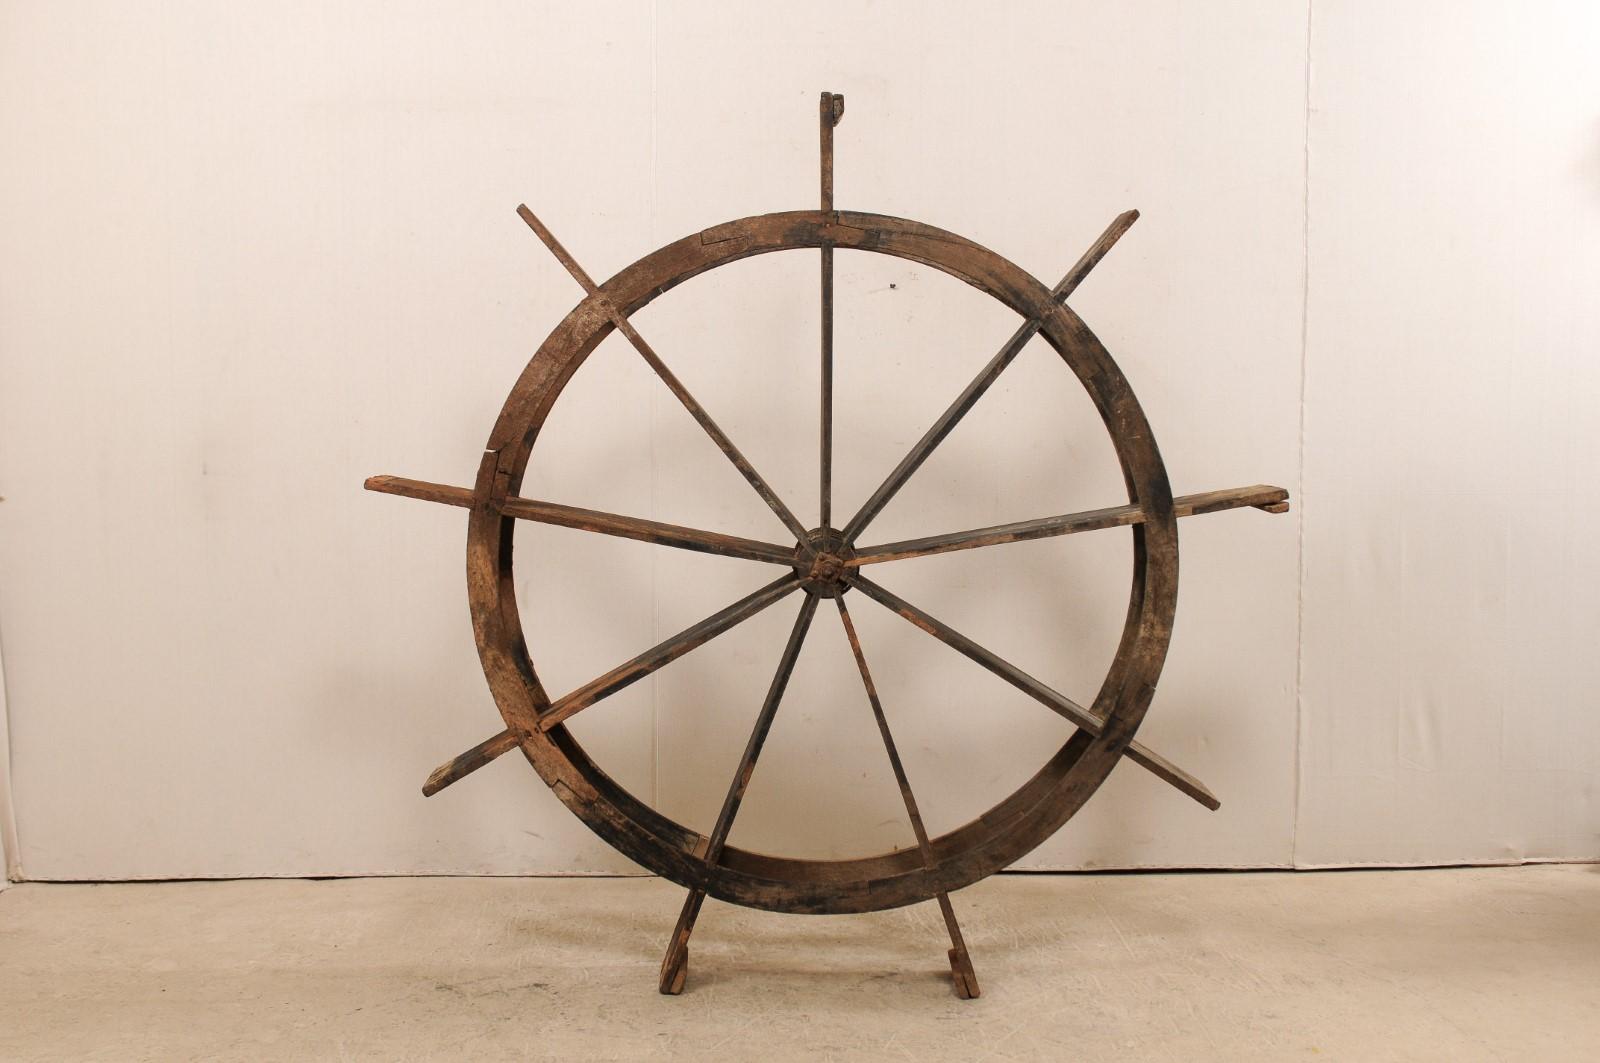 A large antique water wheel from Kerala, India. This Kerala water wheel which stands approximately 6.75 ft tall, also known as a 